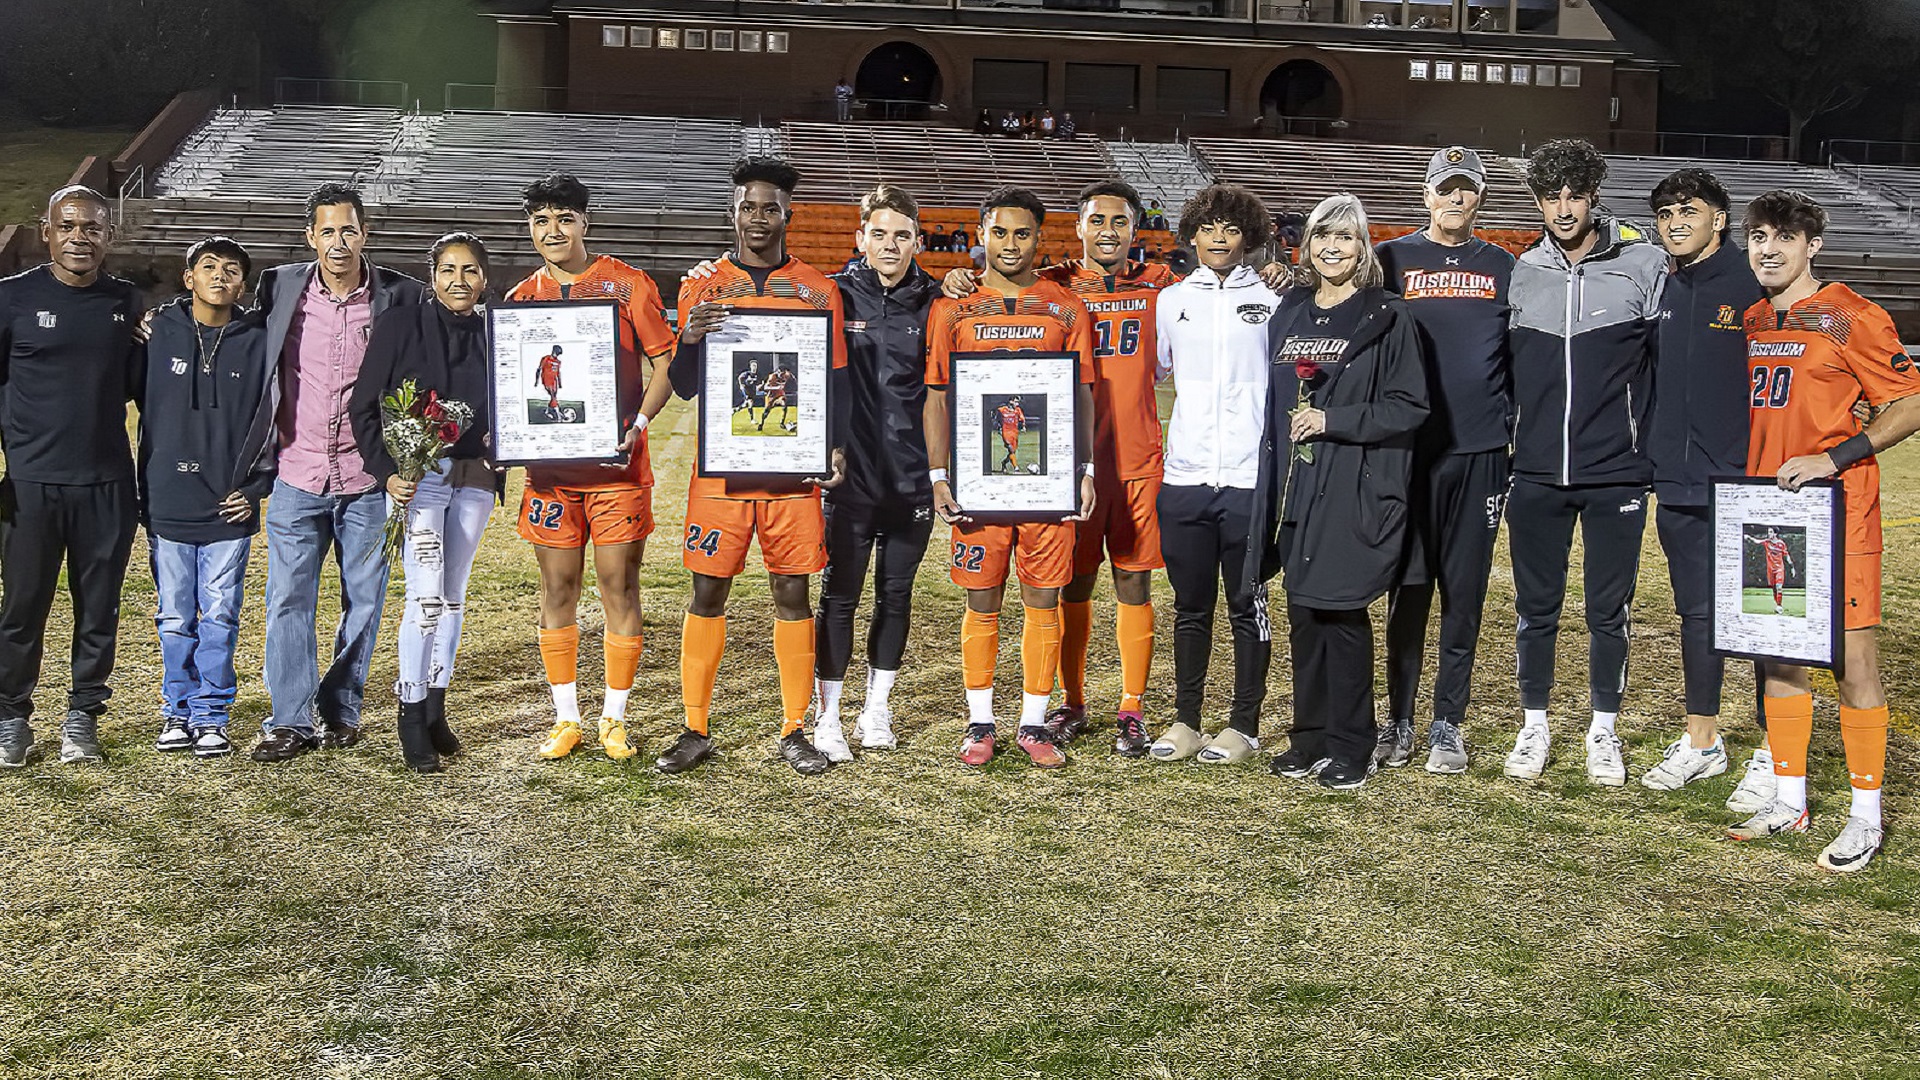 Seniors Juan Villasenor, Ndubueze Henry, J-P Vital and Pedro Concheso are joined by family and friends before Wednesday's match (photo by Chuck Williams)